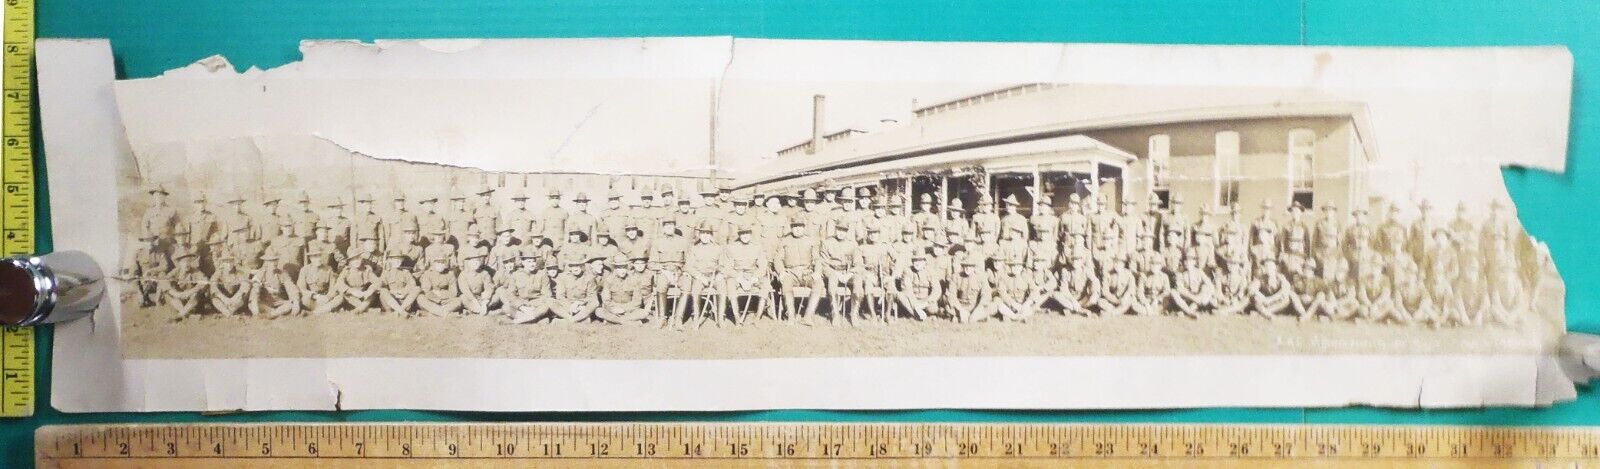 1918 WWI Jefferson Barracks MO Yard Long Photo Infantry Soldiers Officers Swords